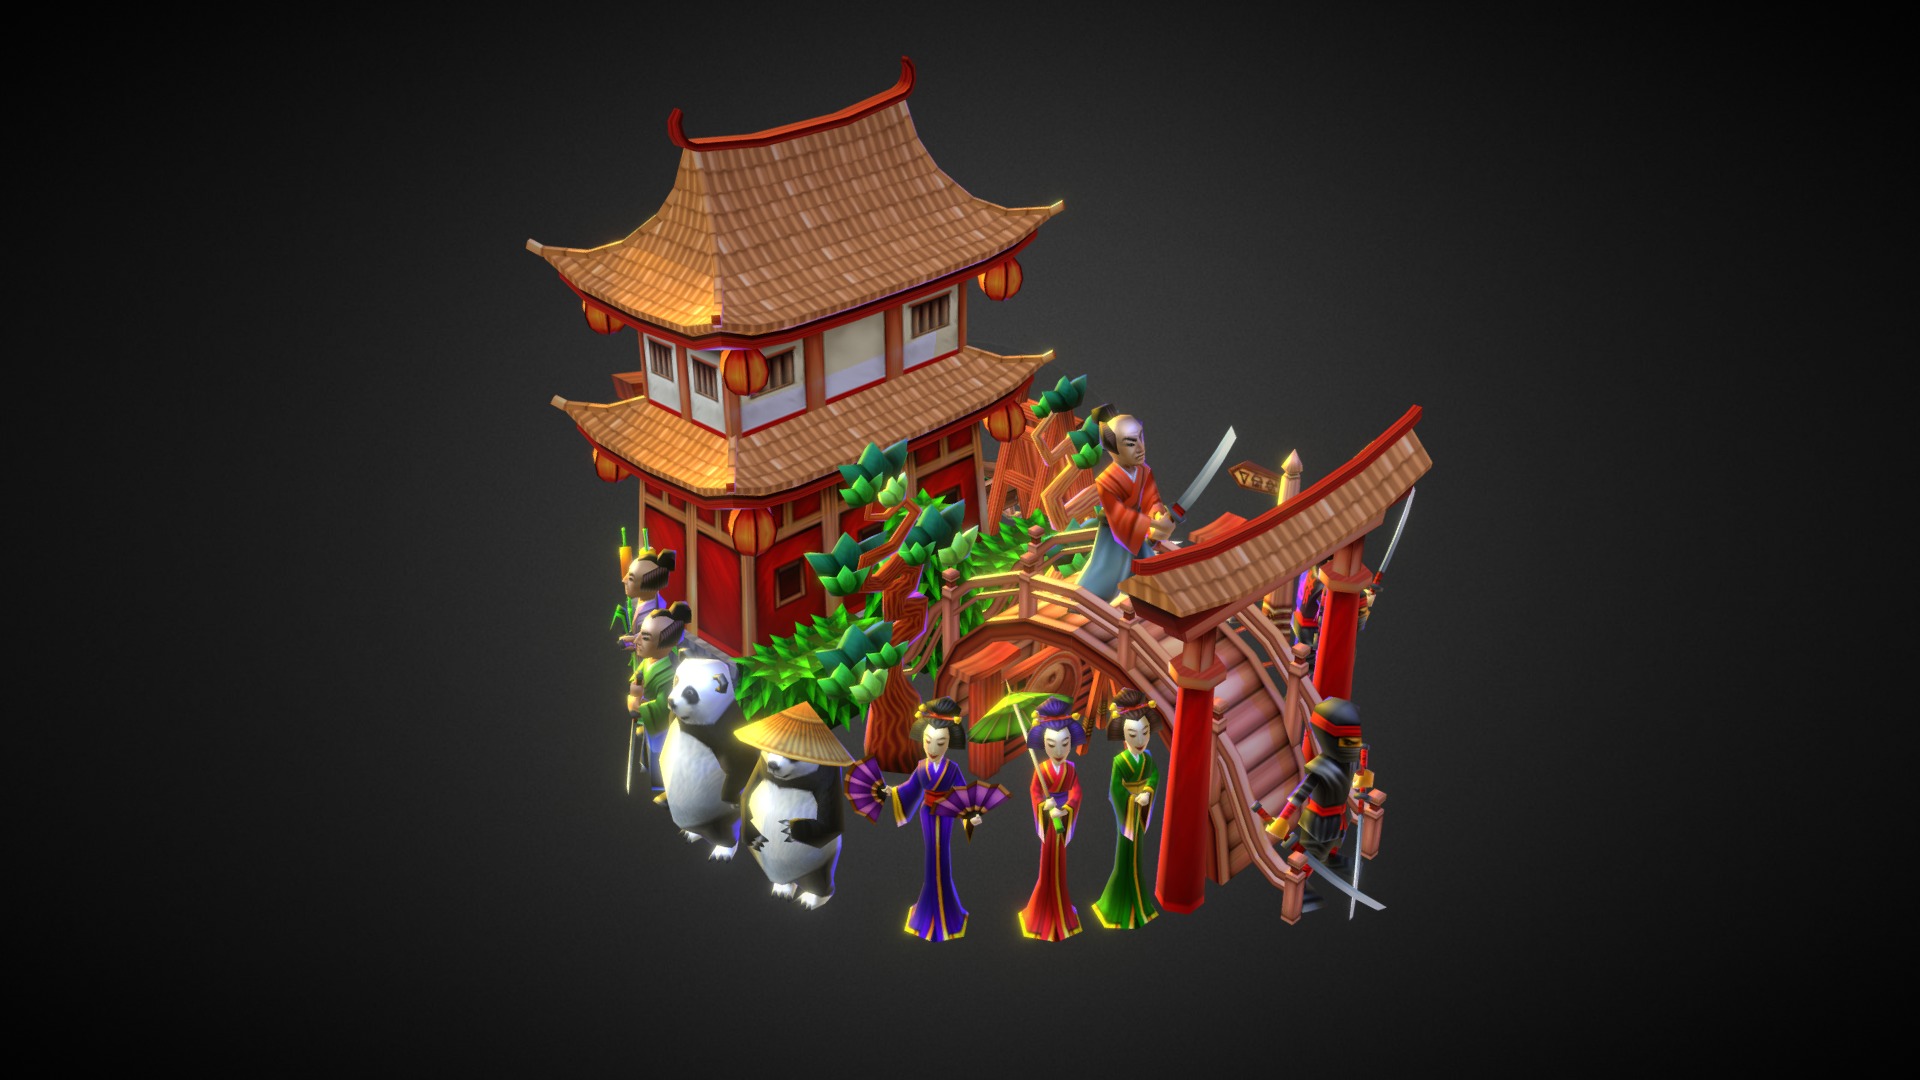 3D model Low-poly Asian Pack - This is a 3D model of the Low-poly Asian Pack. The 3D model is about a gingerbread house with decorations.